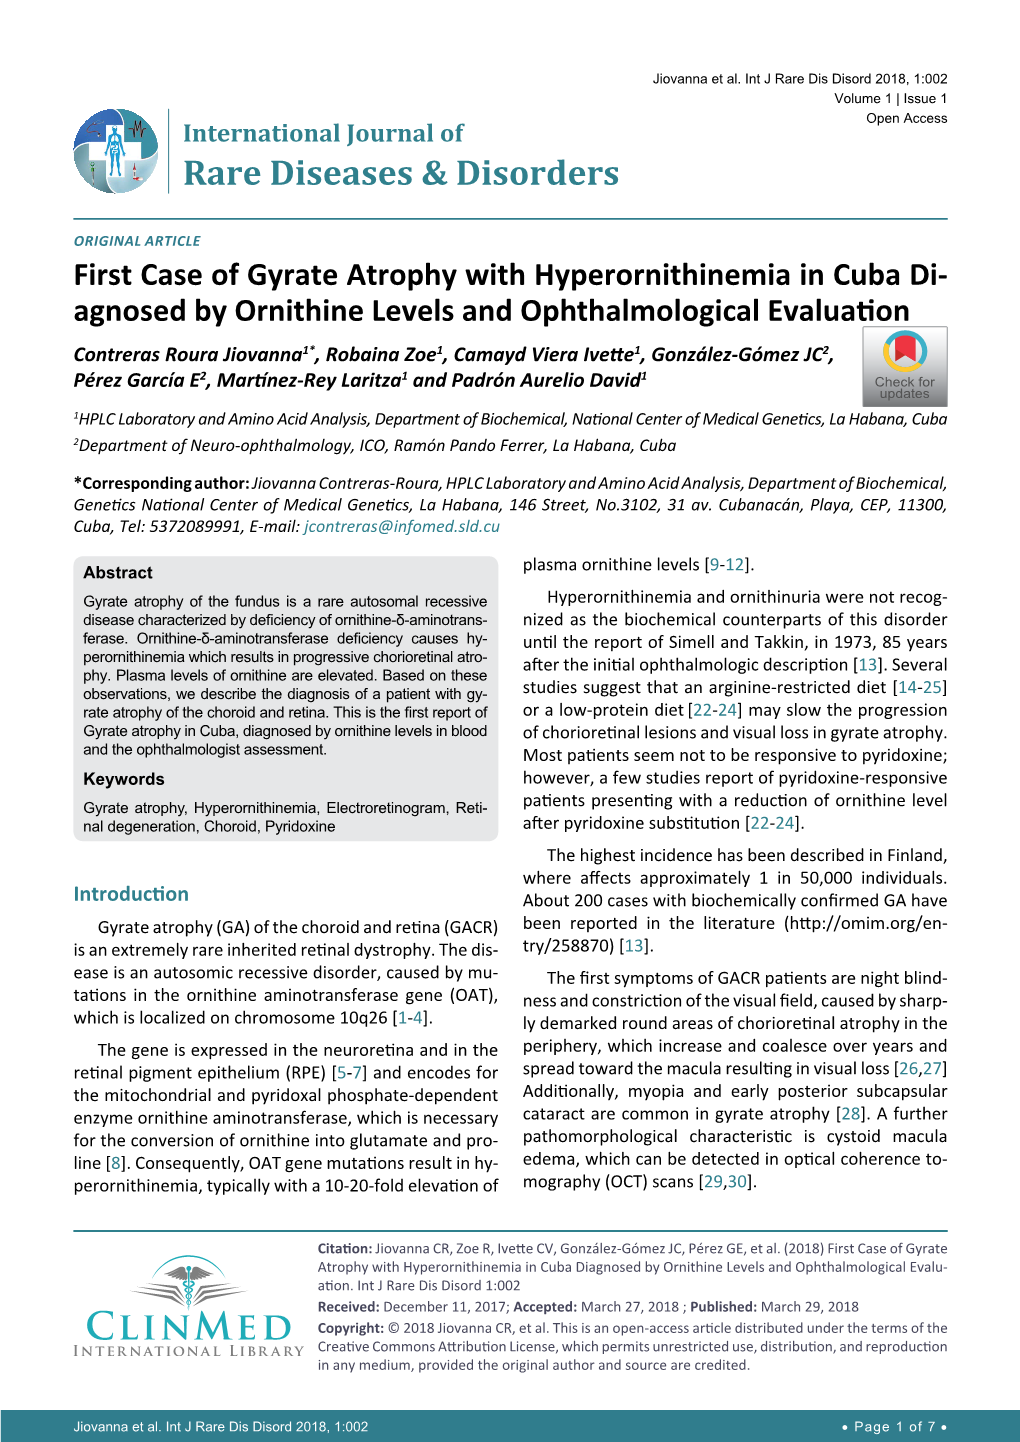 First Case of Gyrate Atrophy with Hyperornithinemia in Cuba